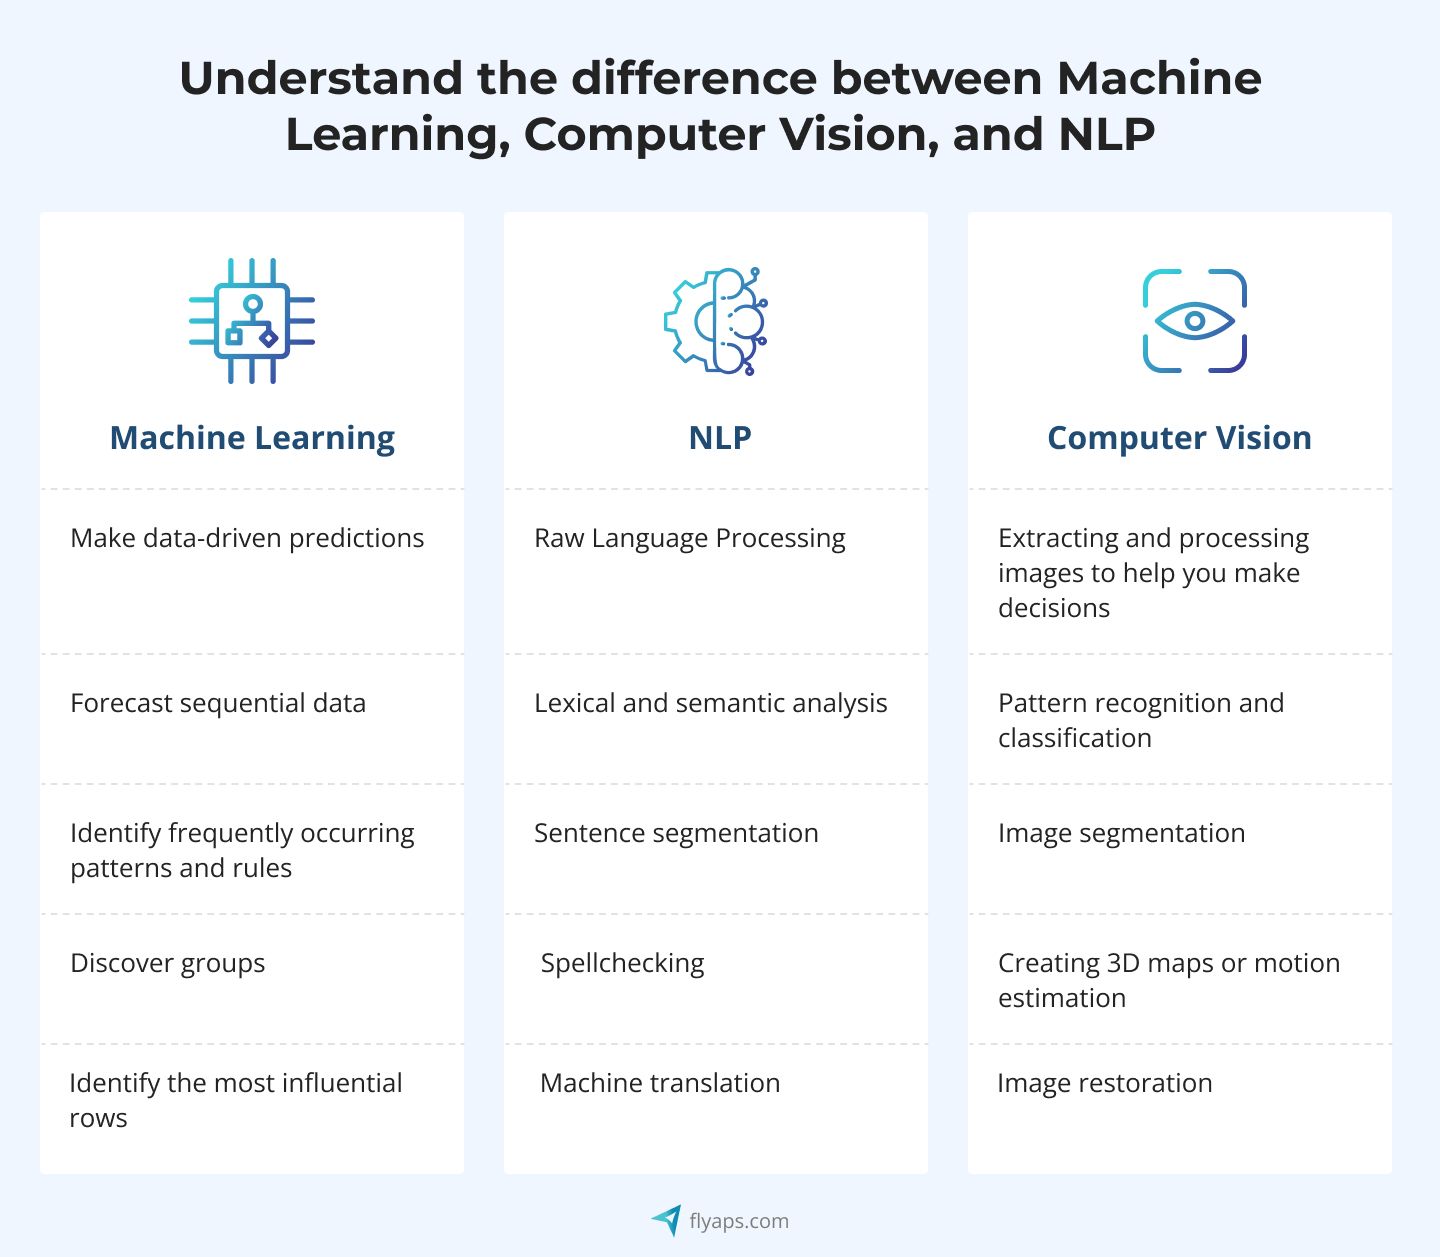 Difference between Machine Learning, Computer Vision, and NLP